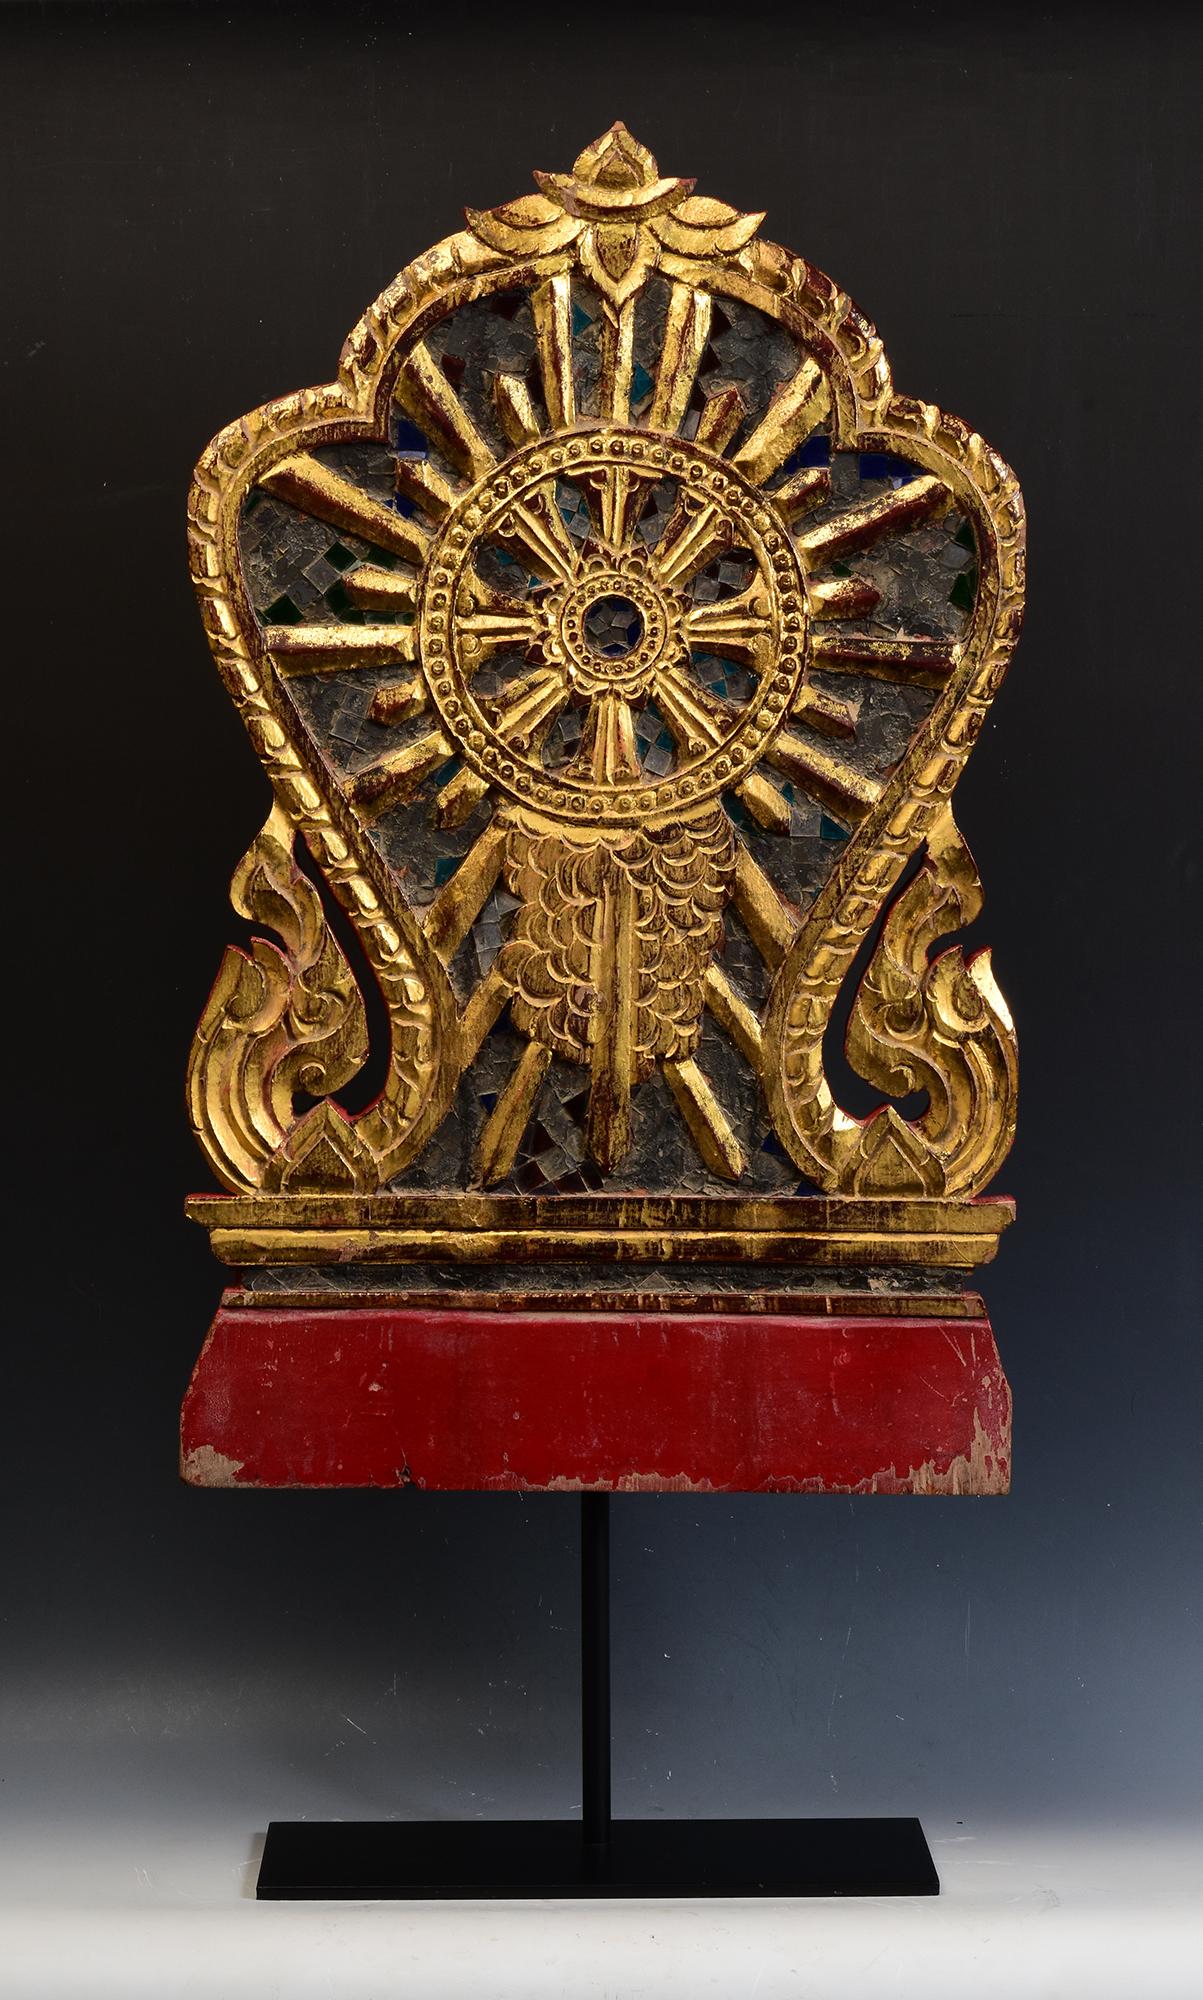 Thai wood carving, carved as Naga under leaf-shape, painted with lacquer and golden color, decorated with mirror-tiles, used for temple decoration.

The middle is carved as Dharmacakra surrounded by flowers and leaves. Dharmacakra (eight-sided